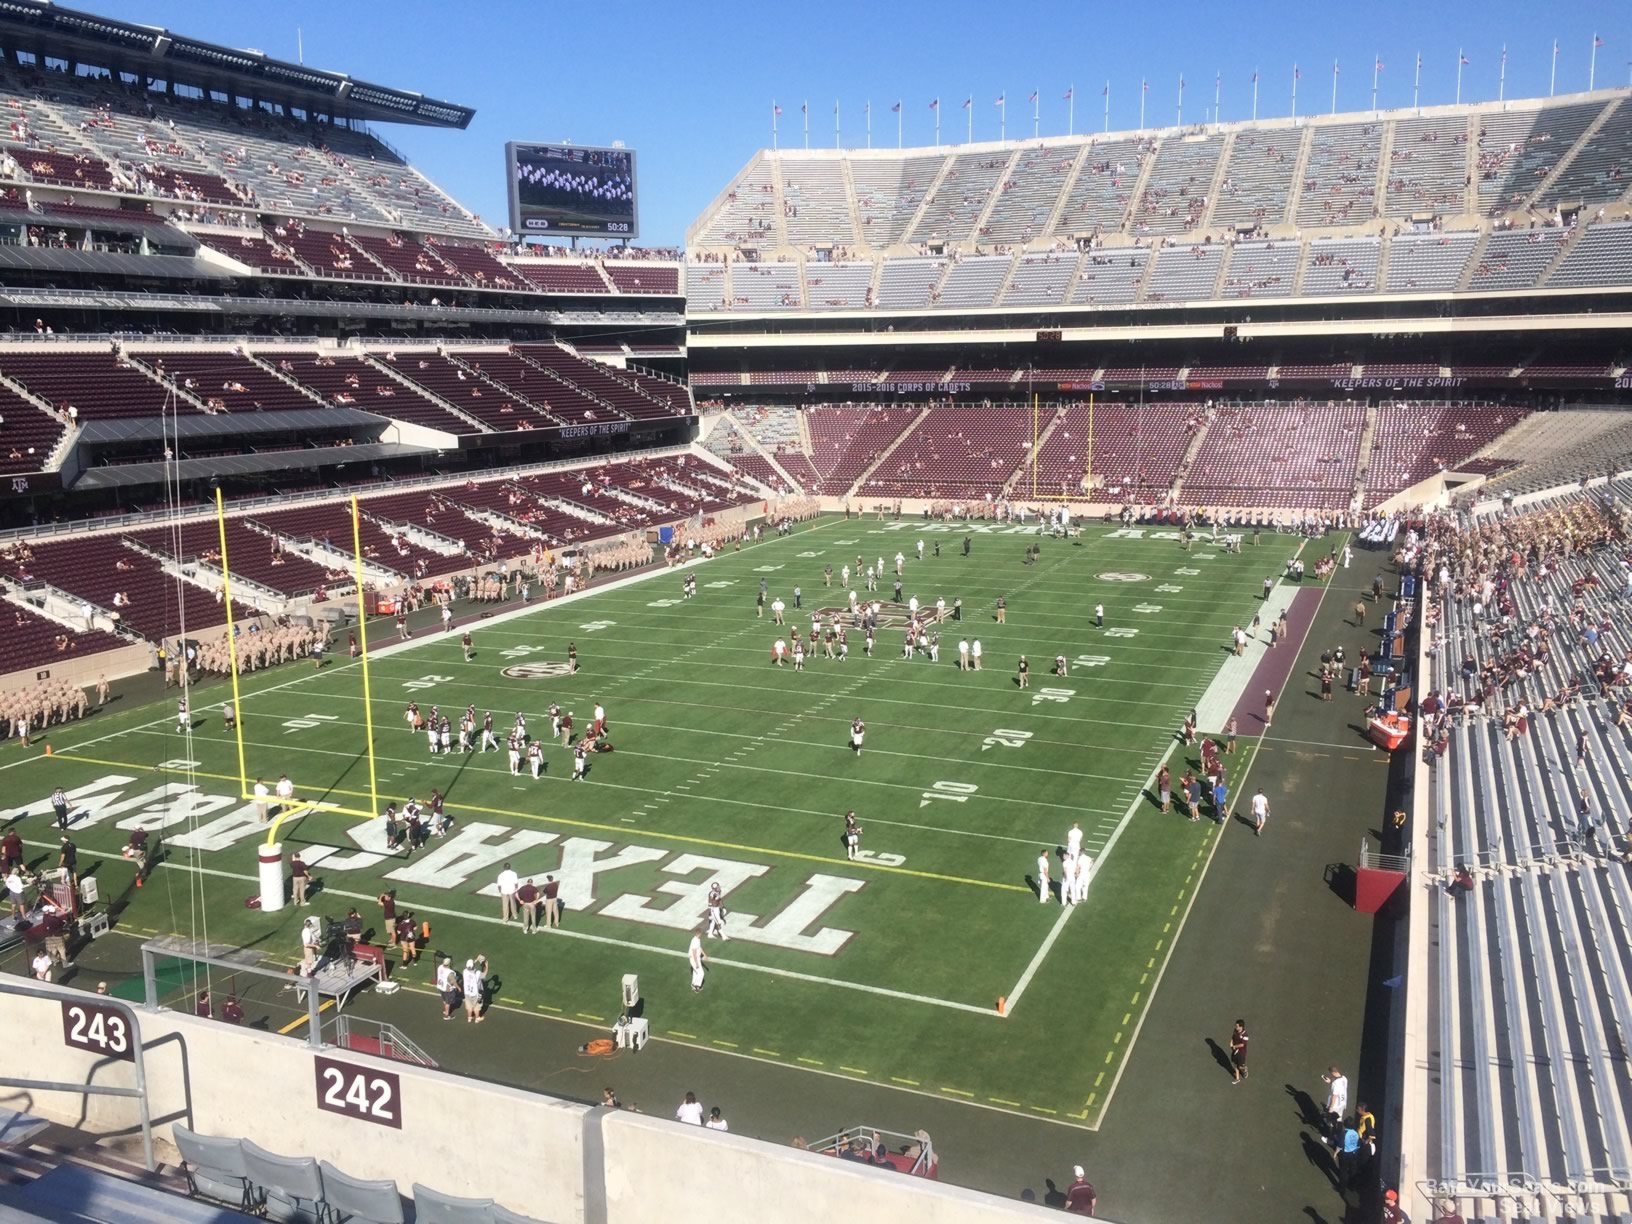 section 242, row 7 seat view  - kyle field